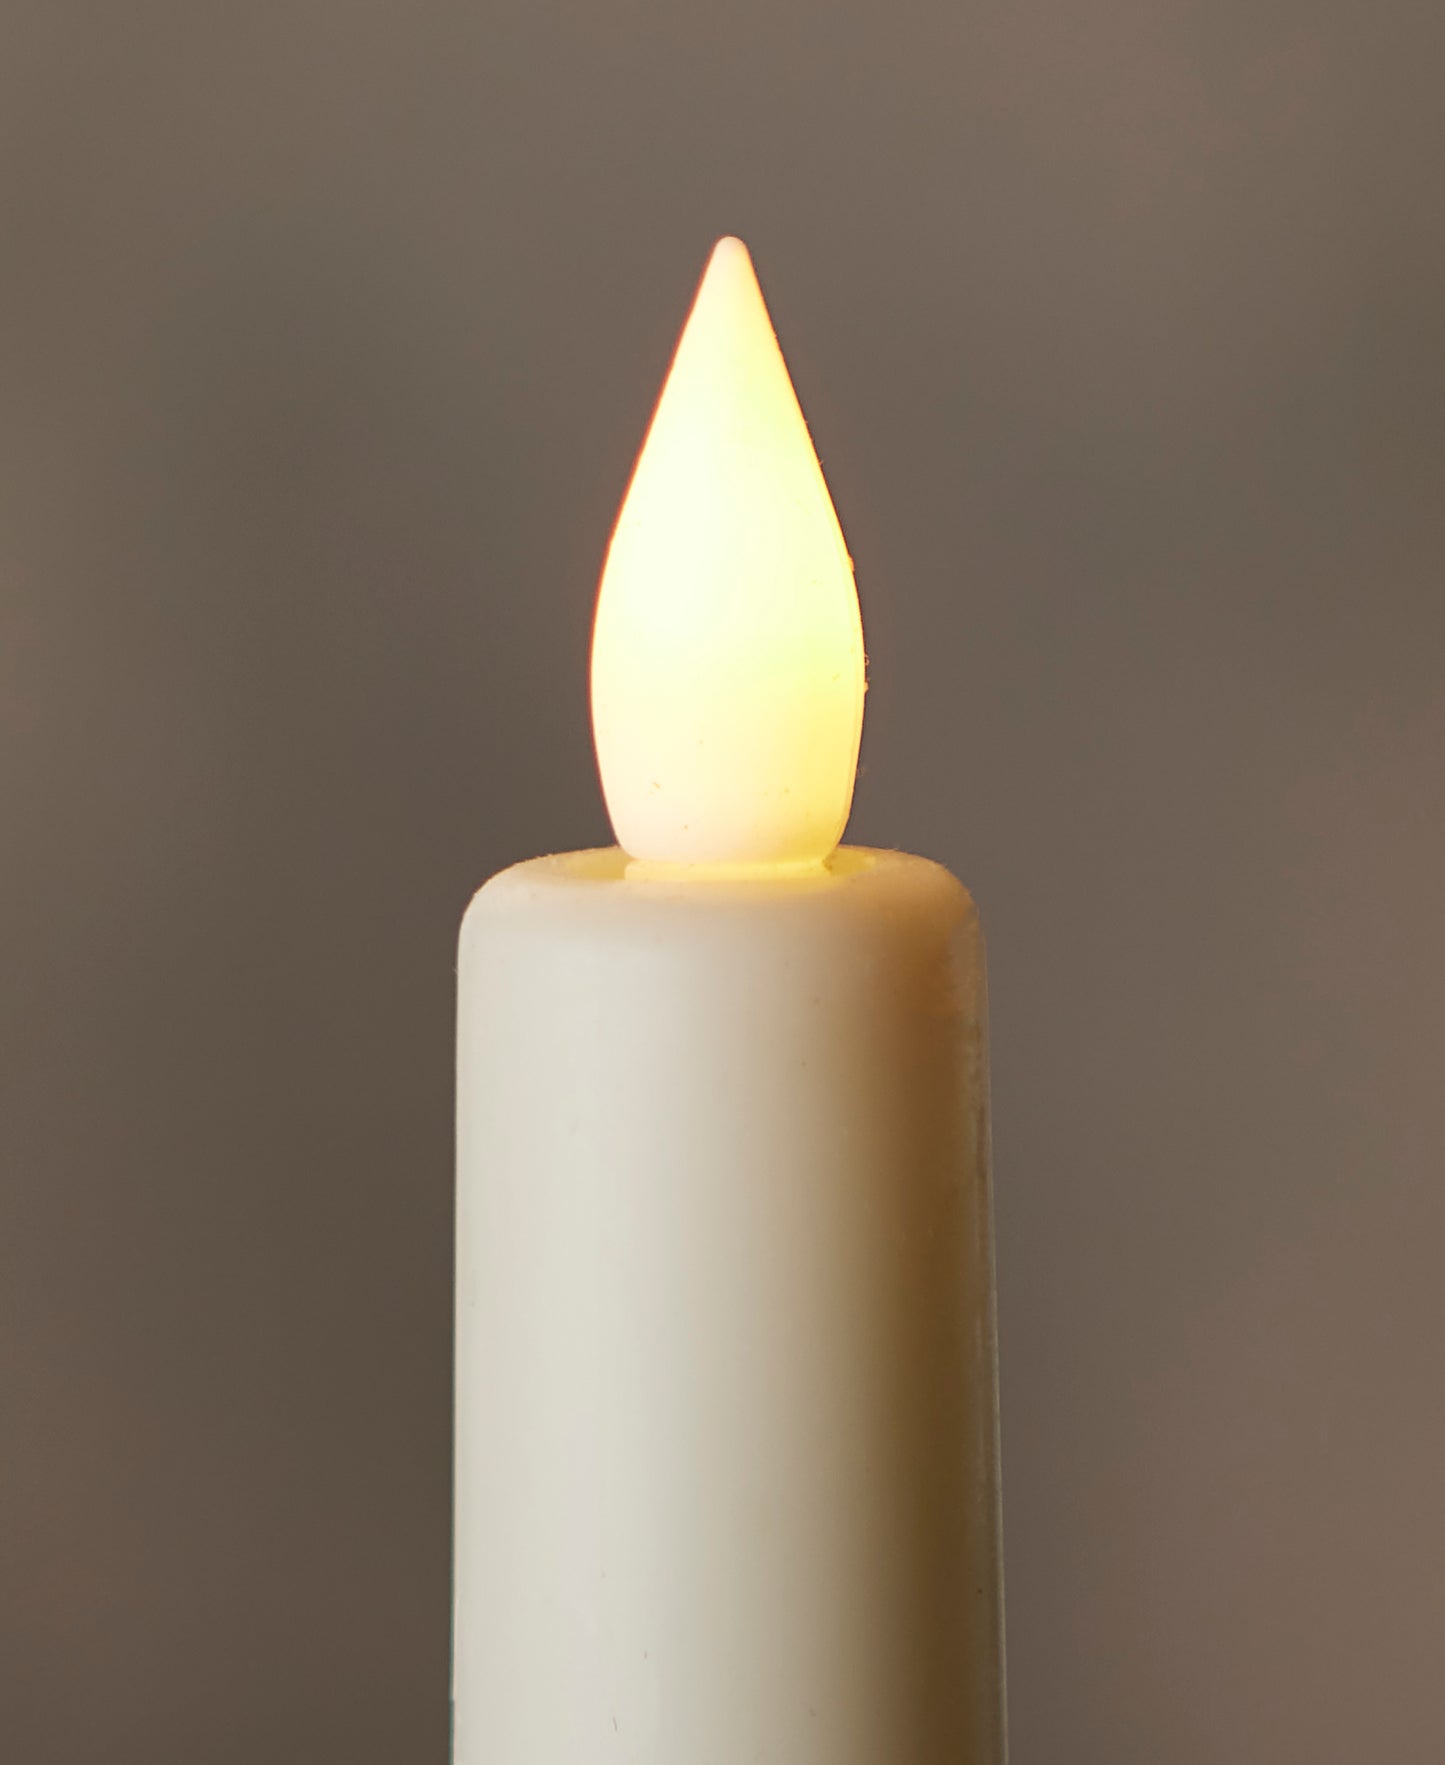 Sutton Fluted Motion Flameless Taper Candle 1 x 9.75